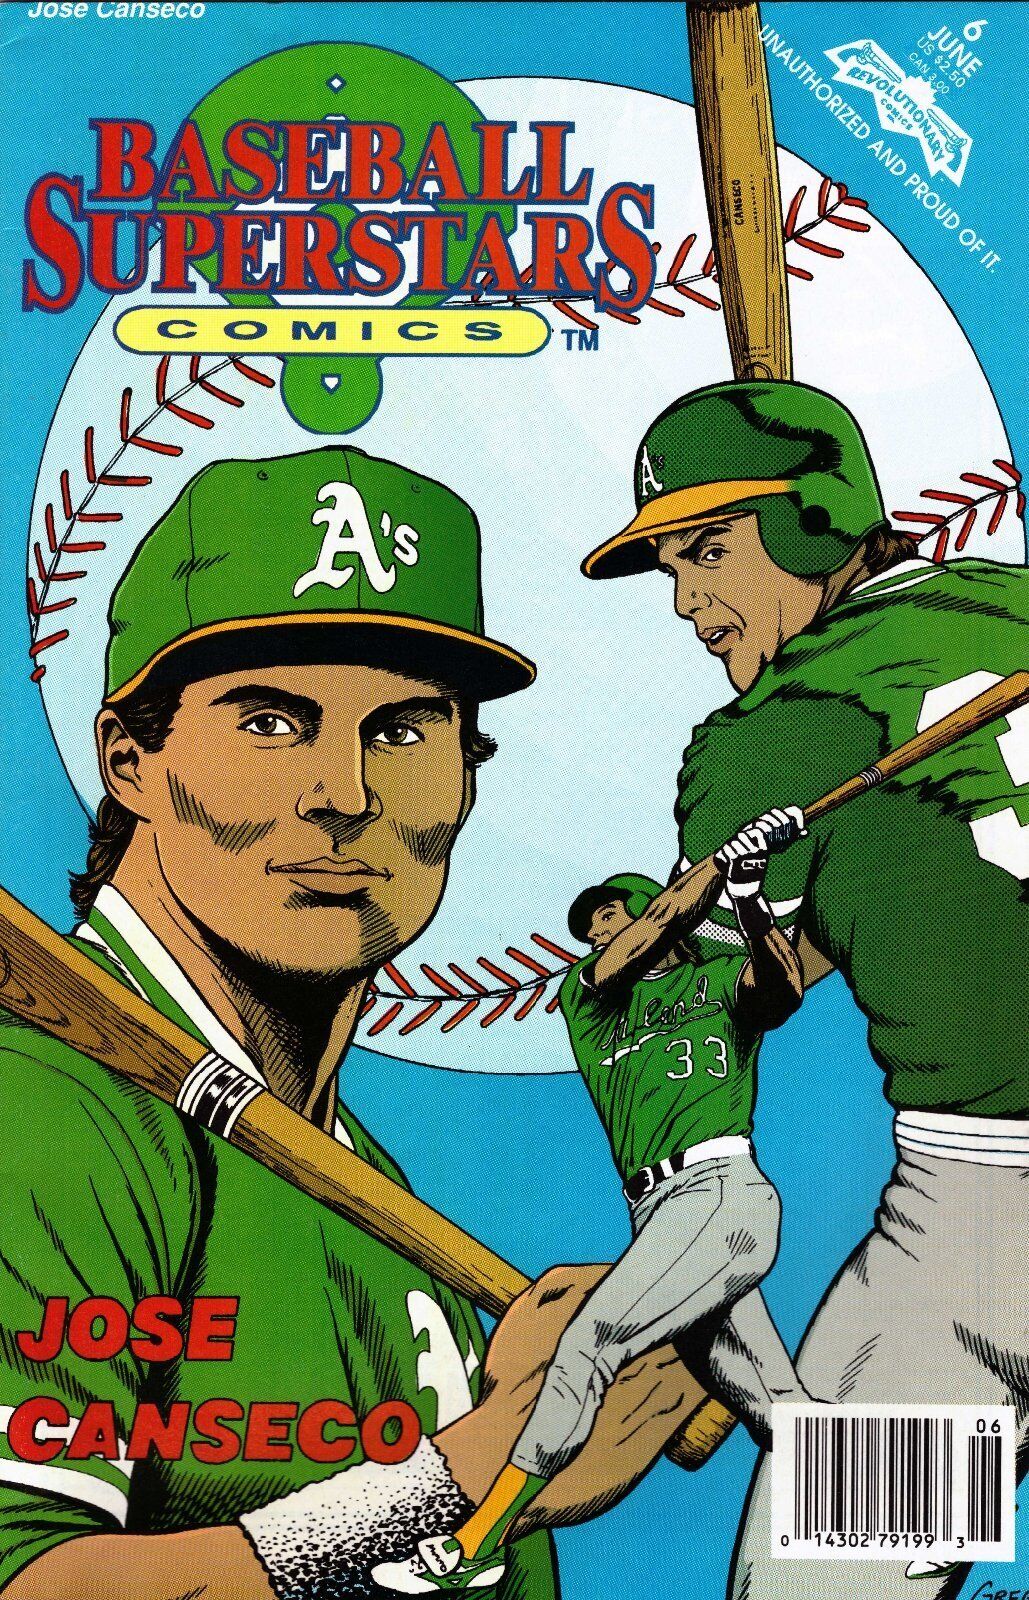 Baseball Superstars Comics #6 Jose Canseco Newsstand Cover (1991-1993)